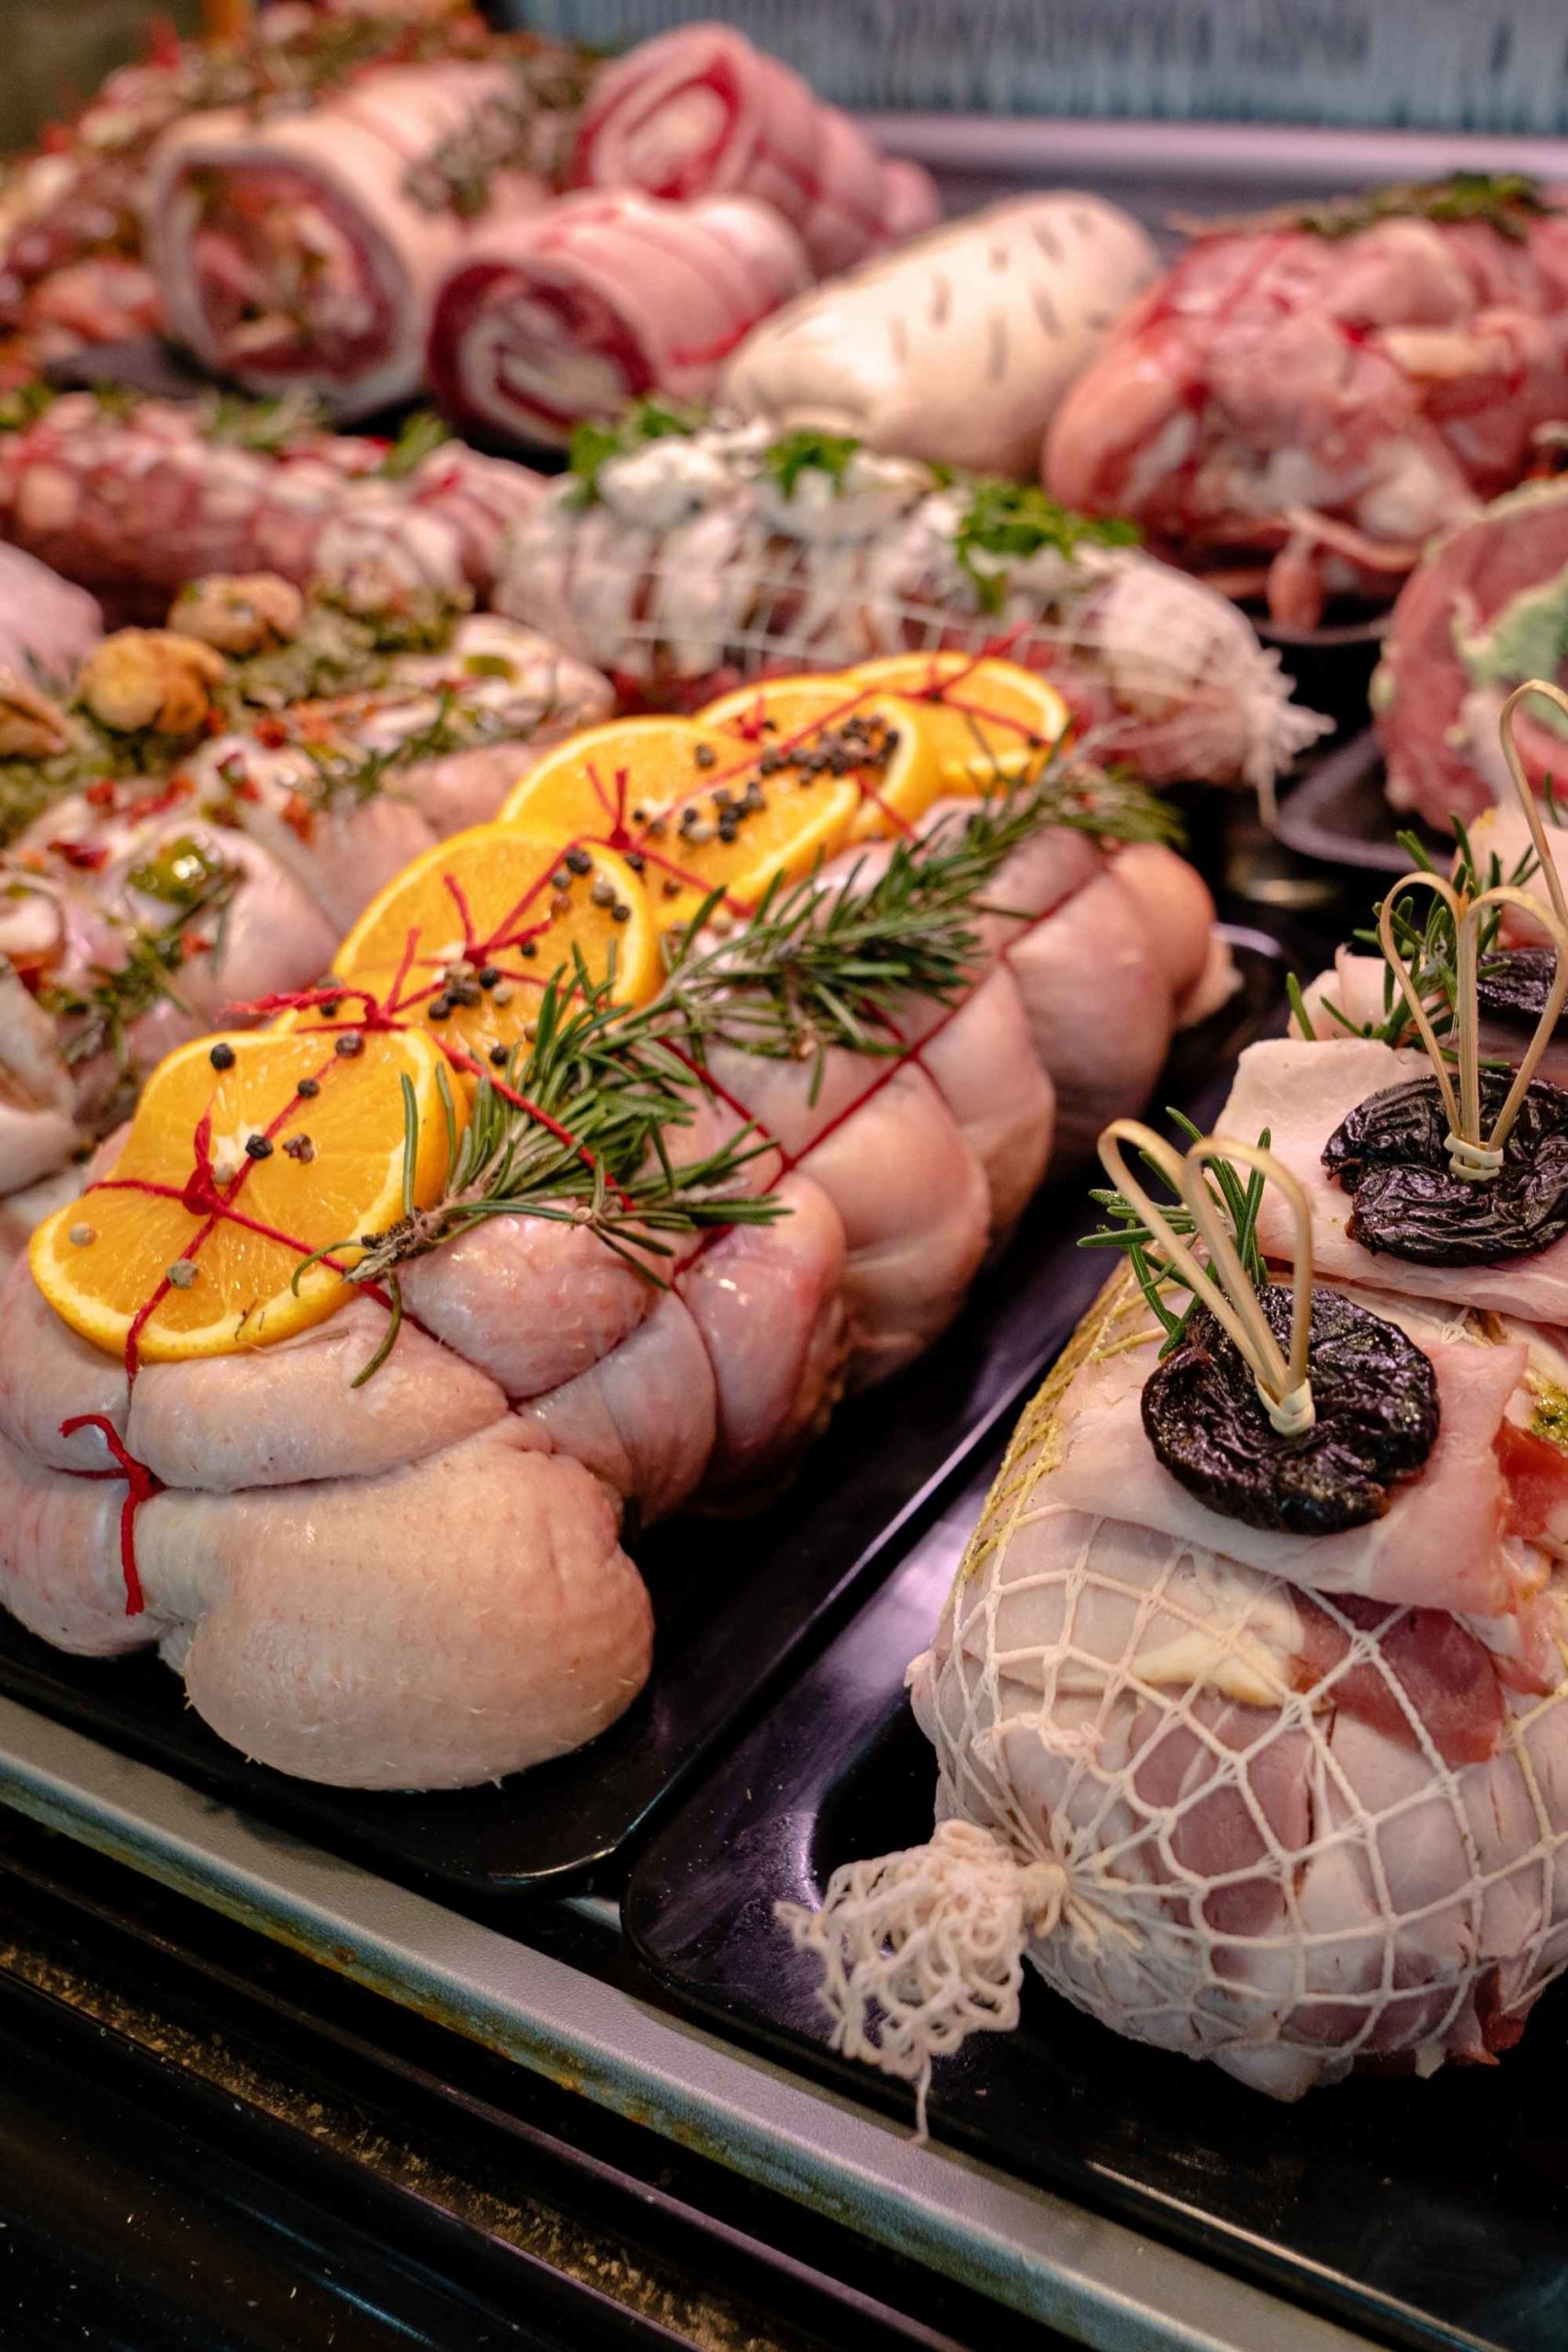 A house-made gourmet menu has established J&M as one of the best butchers in Malta